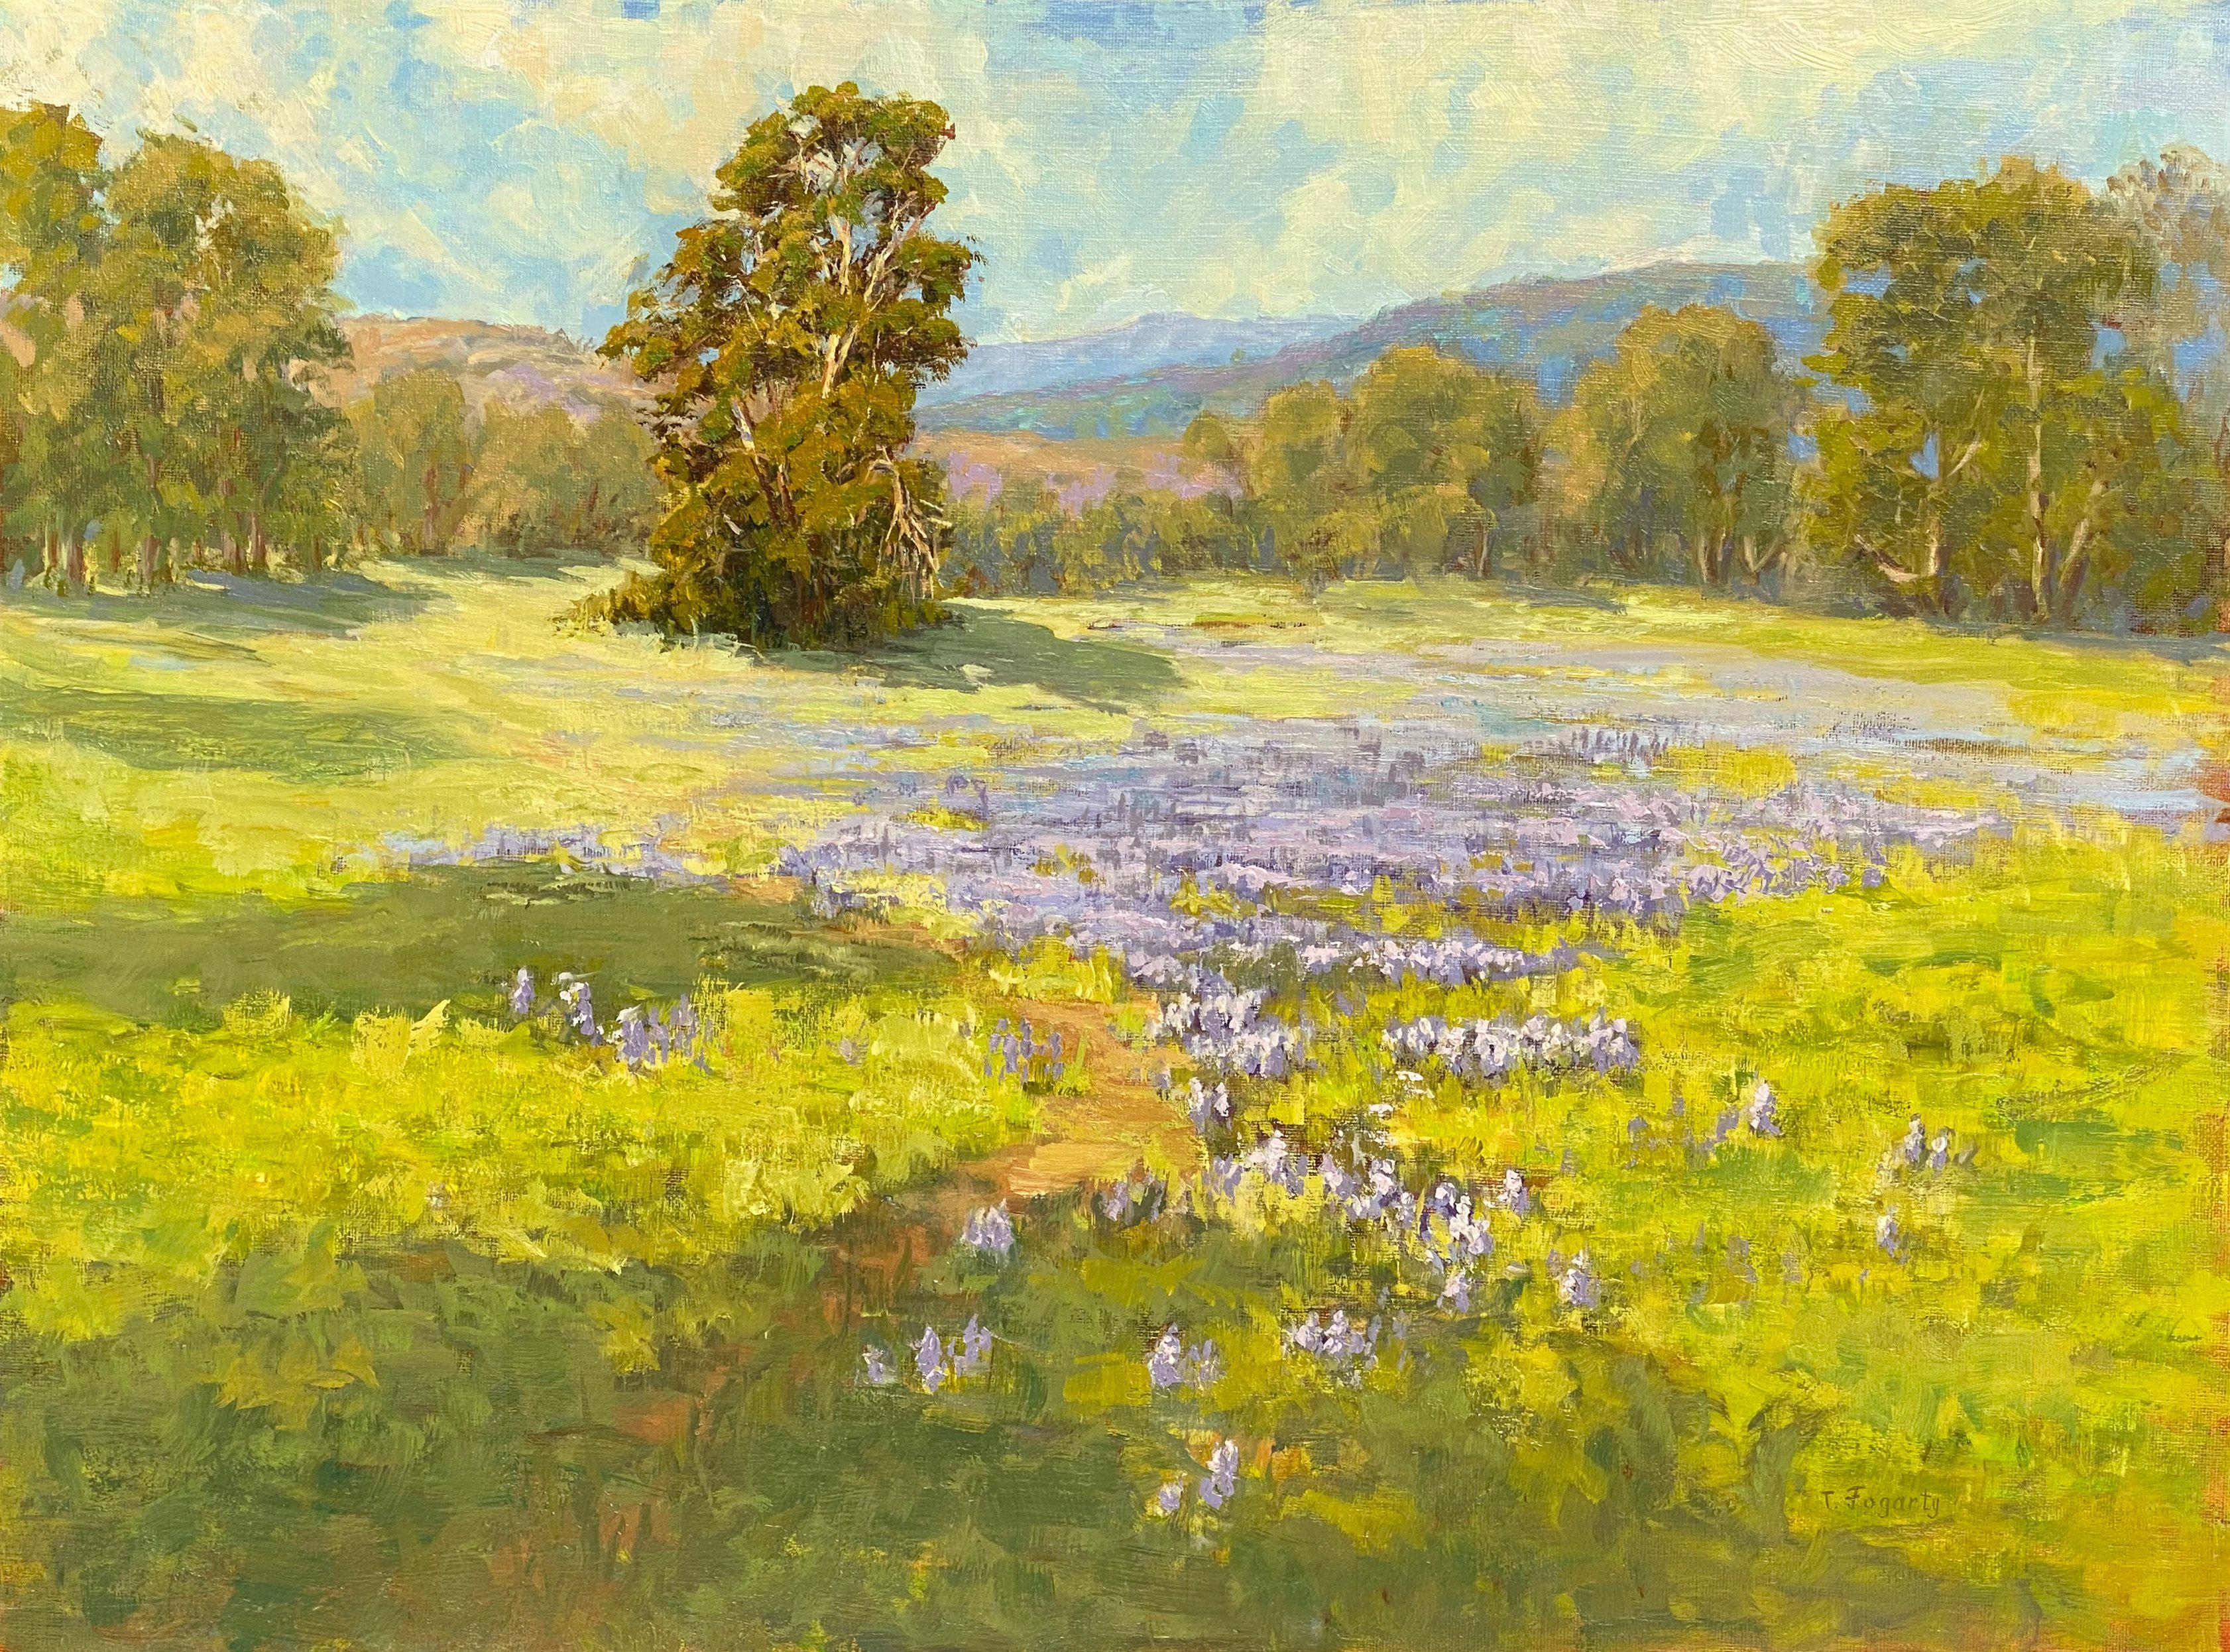 Tatyana Fogarty Landscape Painting - Lupine Meadow Spring Landscape, Painting, Oil on Canvas